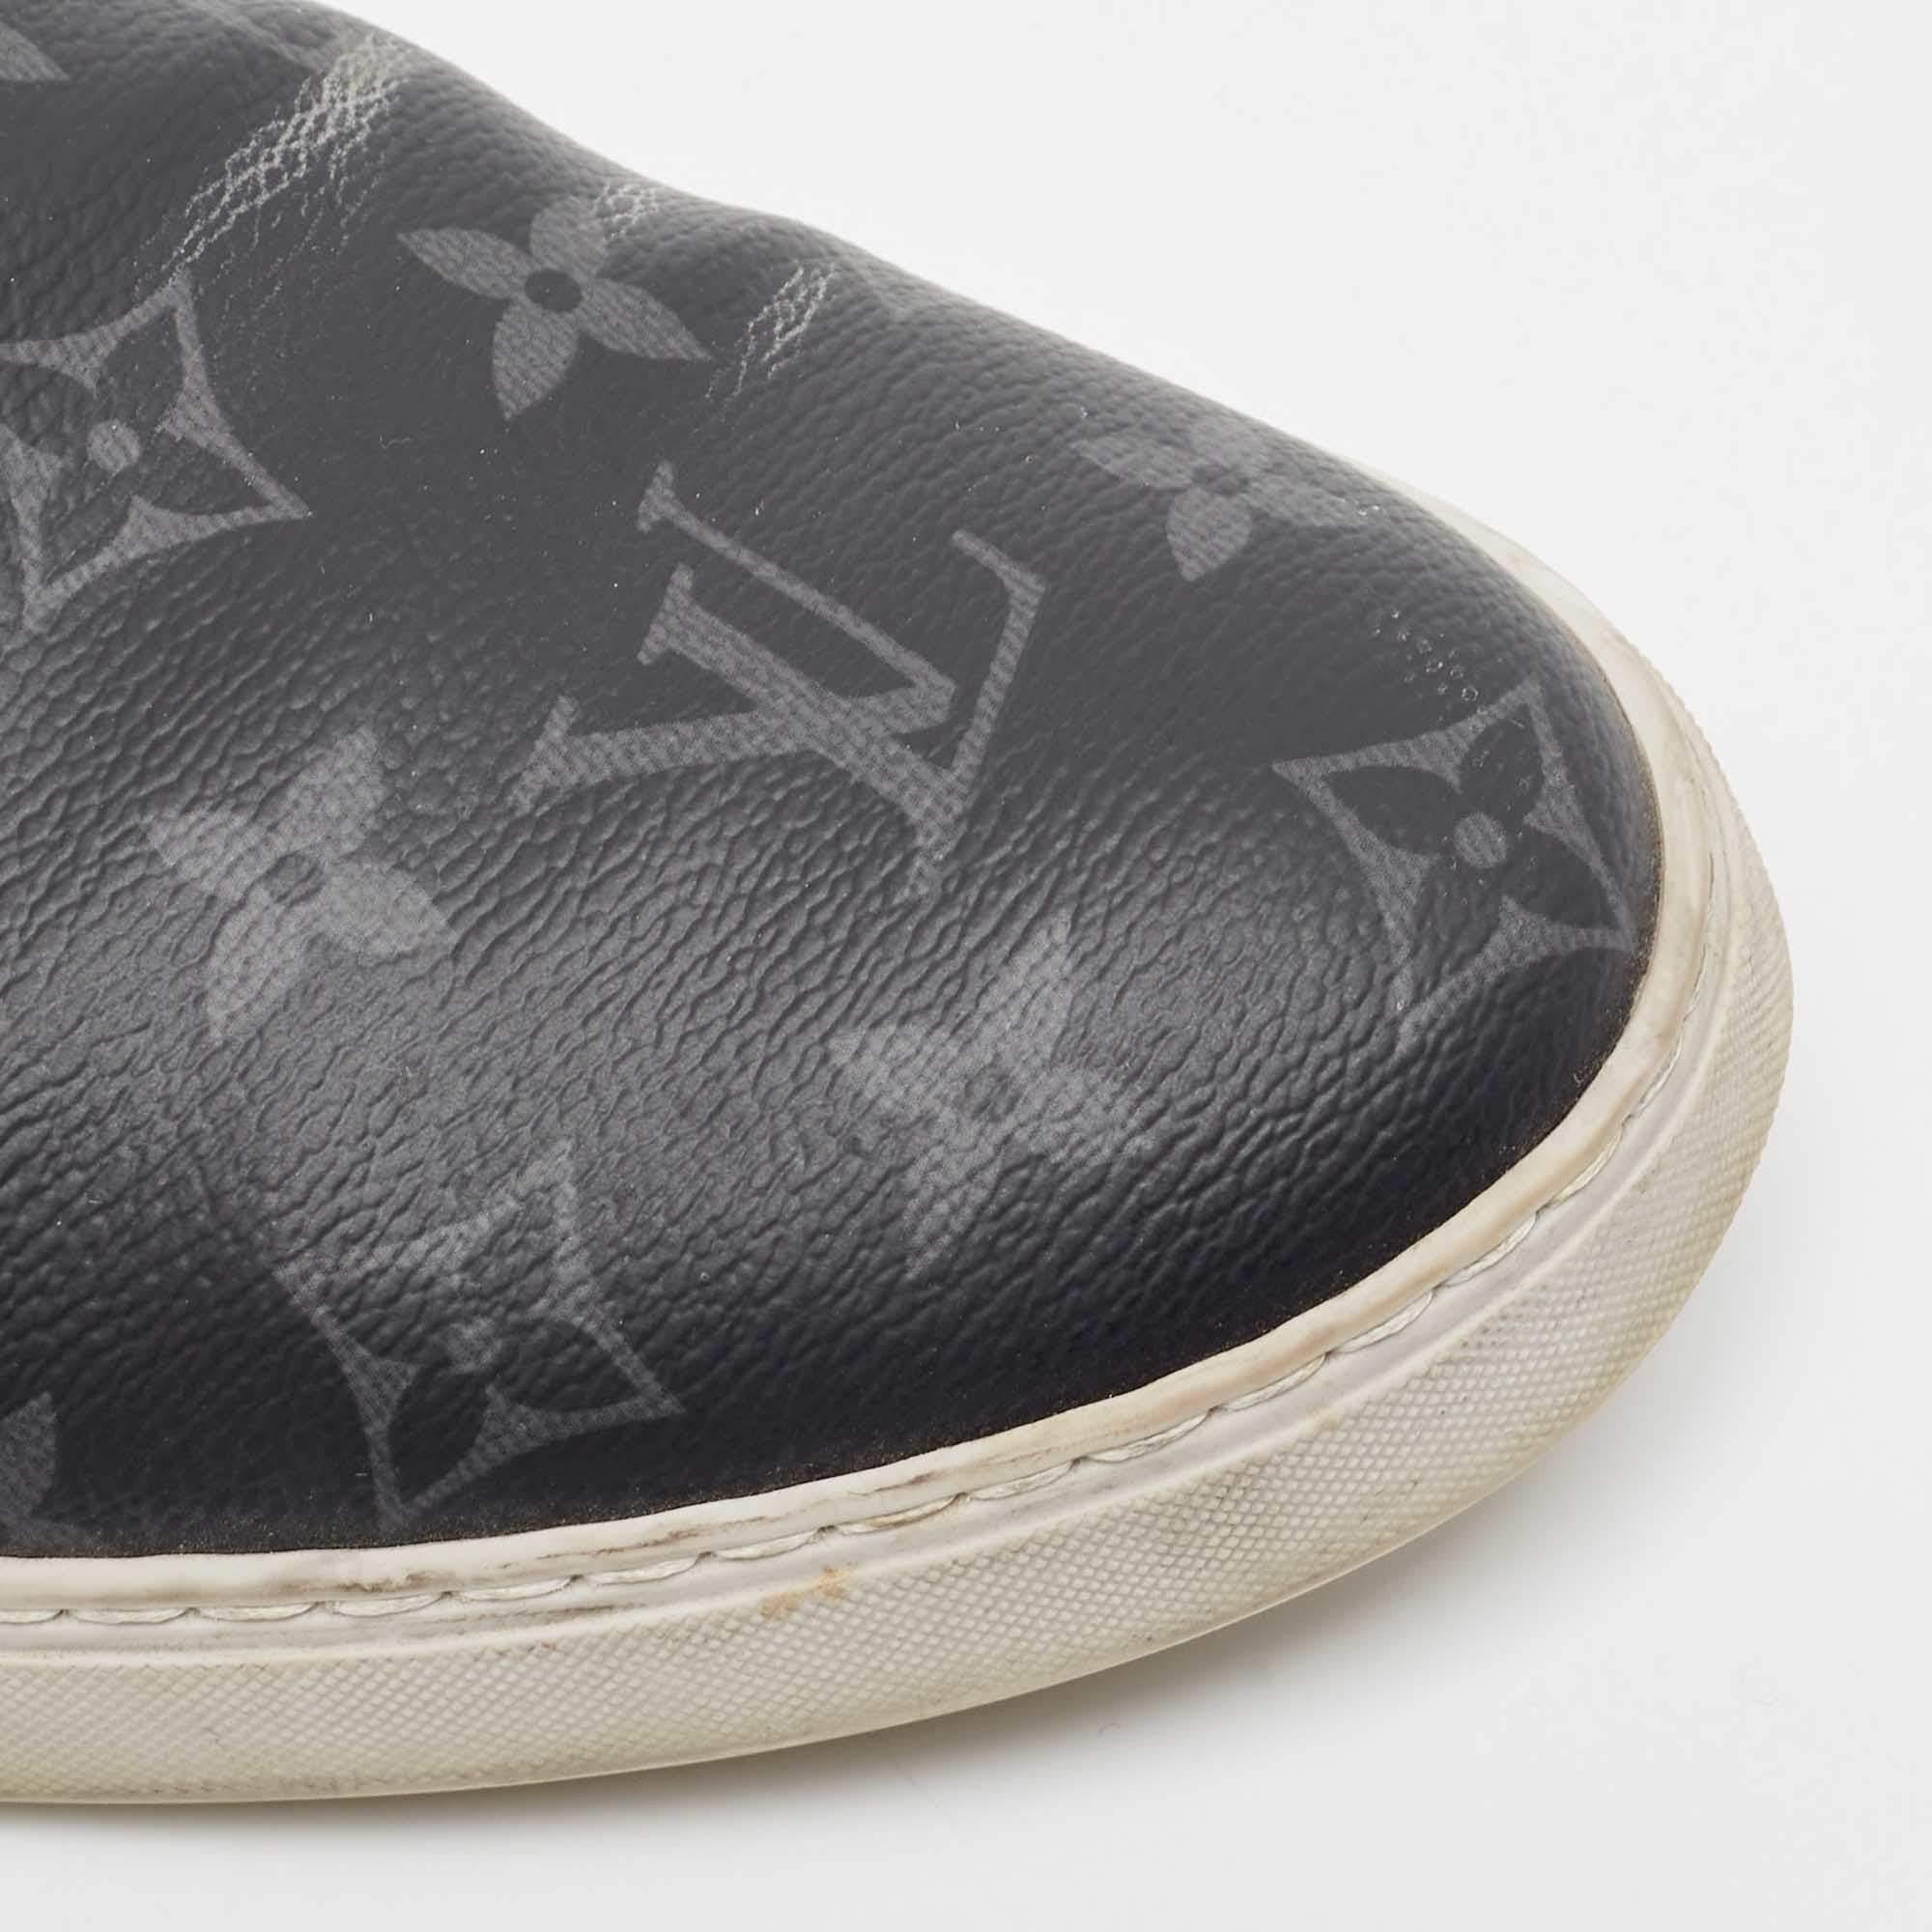 Louis Vuitton Black/Grey Monogram Canvas and Leather Slip On Sneakers Size 42.5 For Sale 2